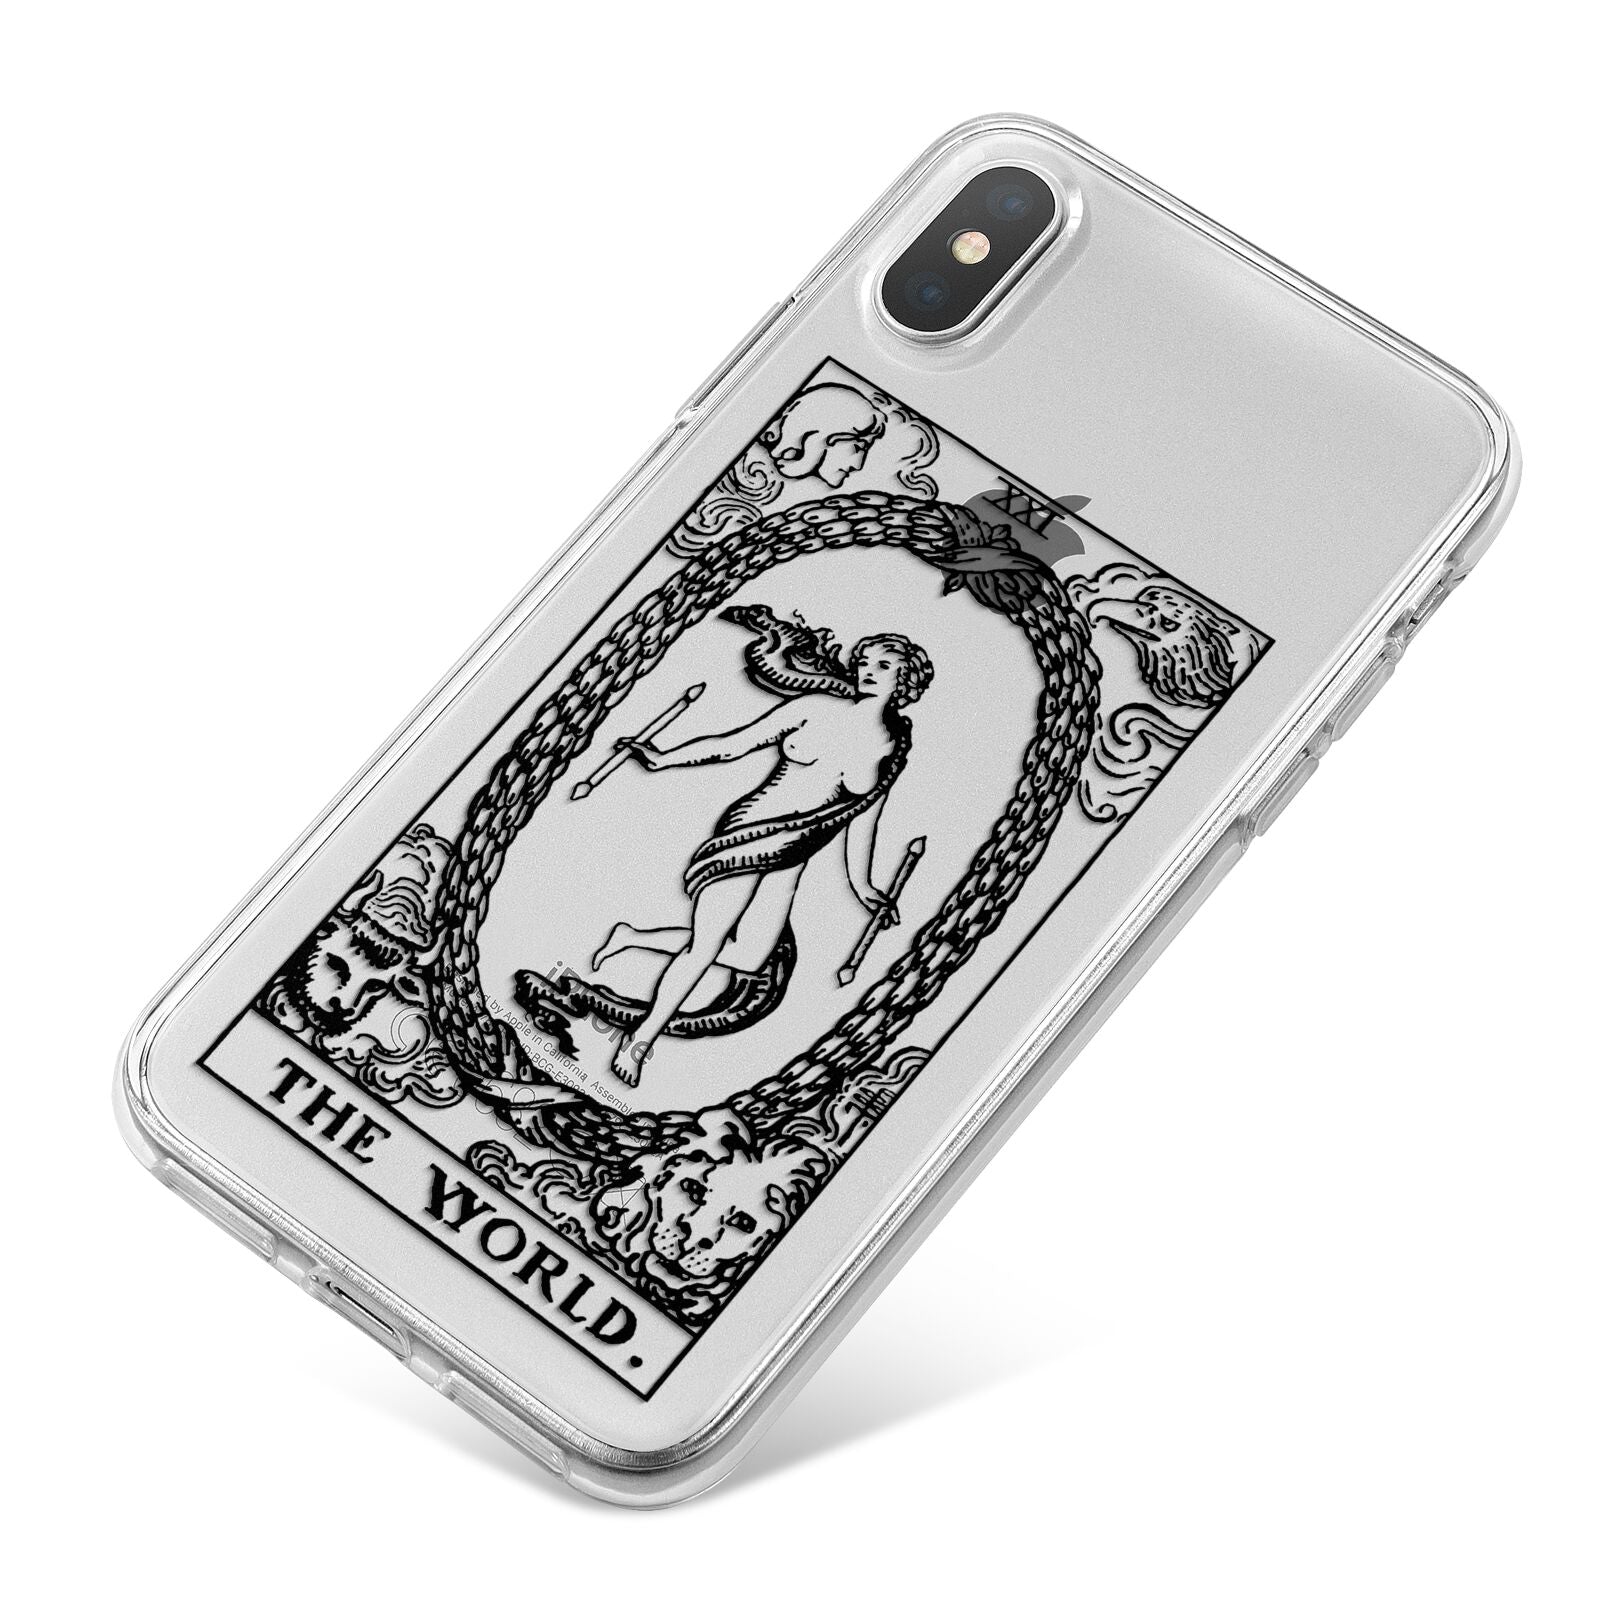 The World Monochrome iPhone X Bumper Case on Silver iPhone